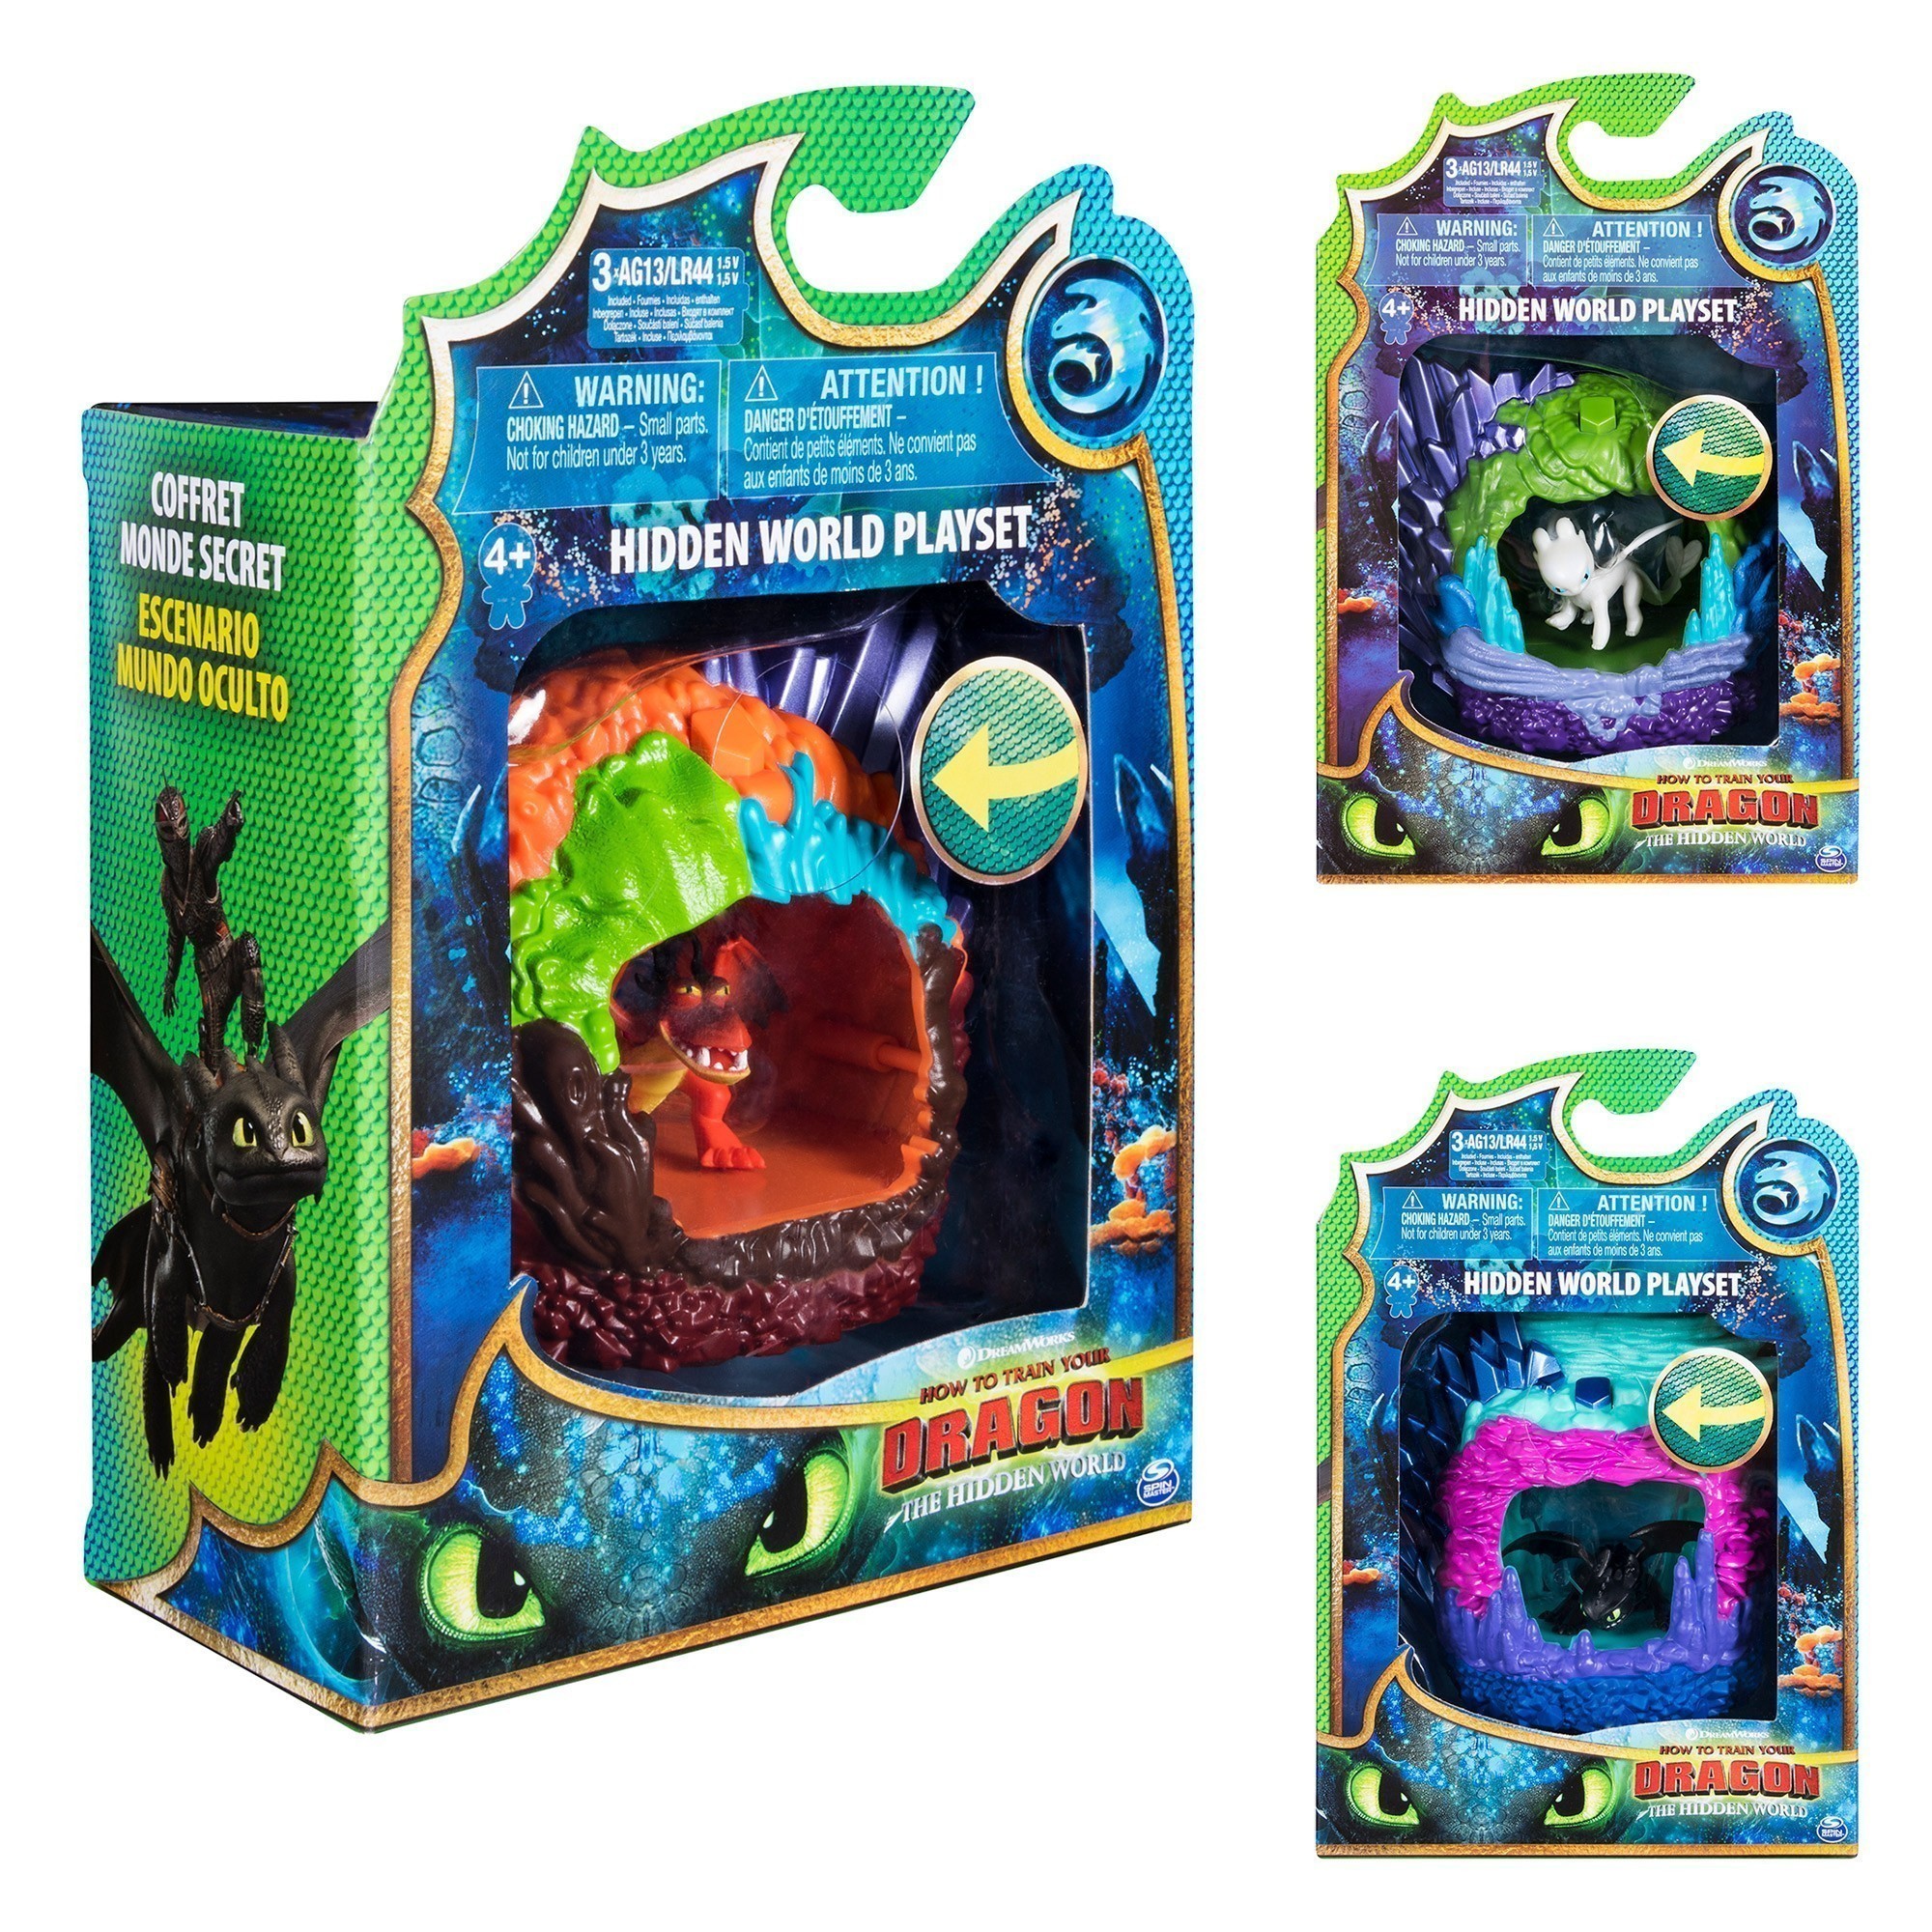 Dreamworks - How To Train Your Dragon 3 - Dragon Lair Playset Assortment